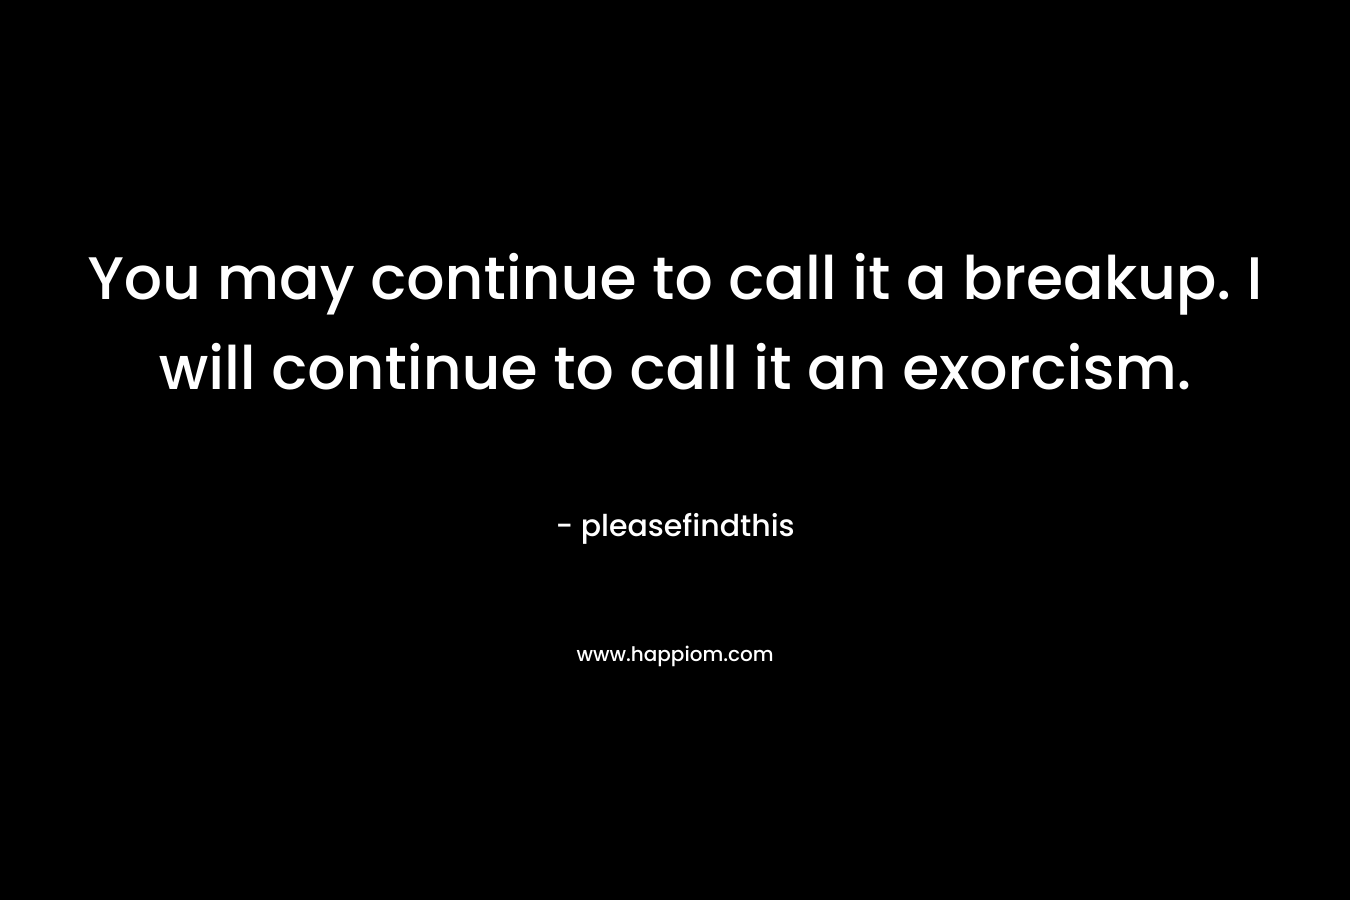 You may continue to call it a breakup. I will continue to call it an exorcism. – pleasefindthis